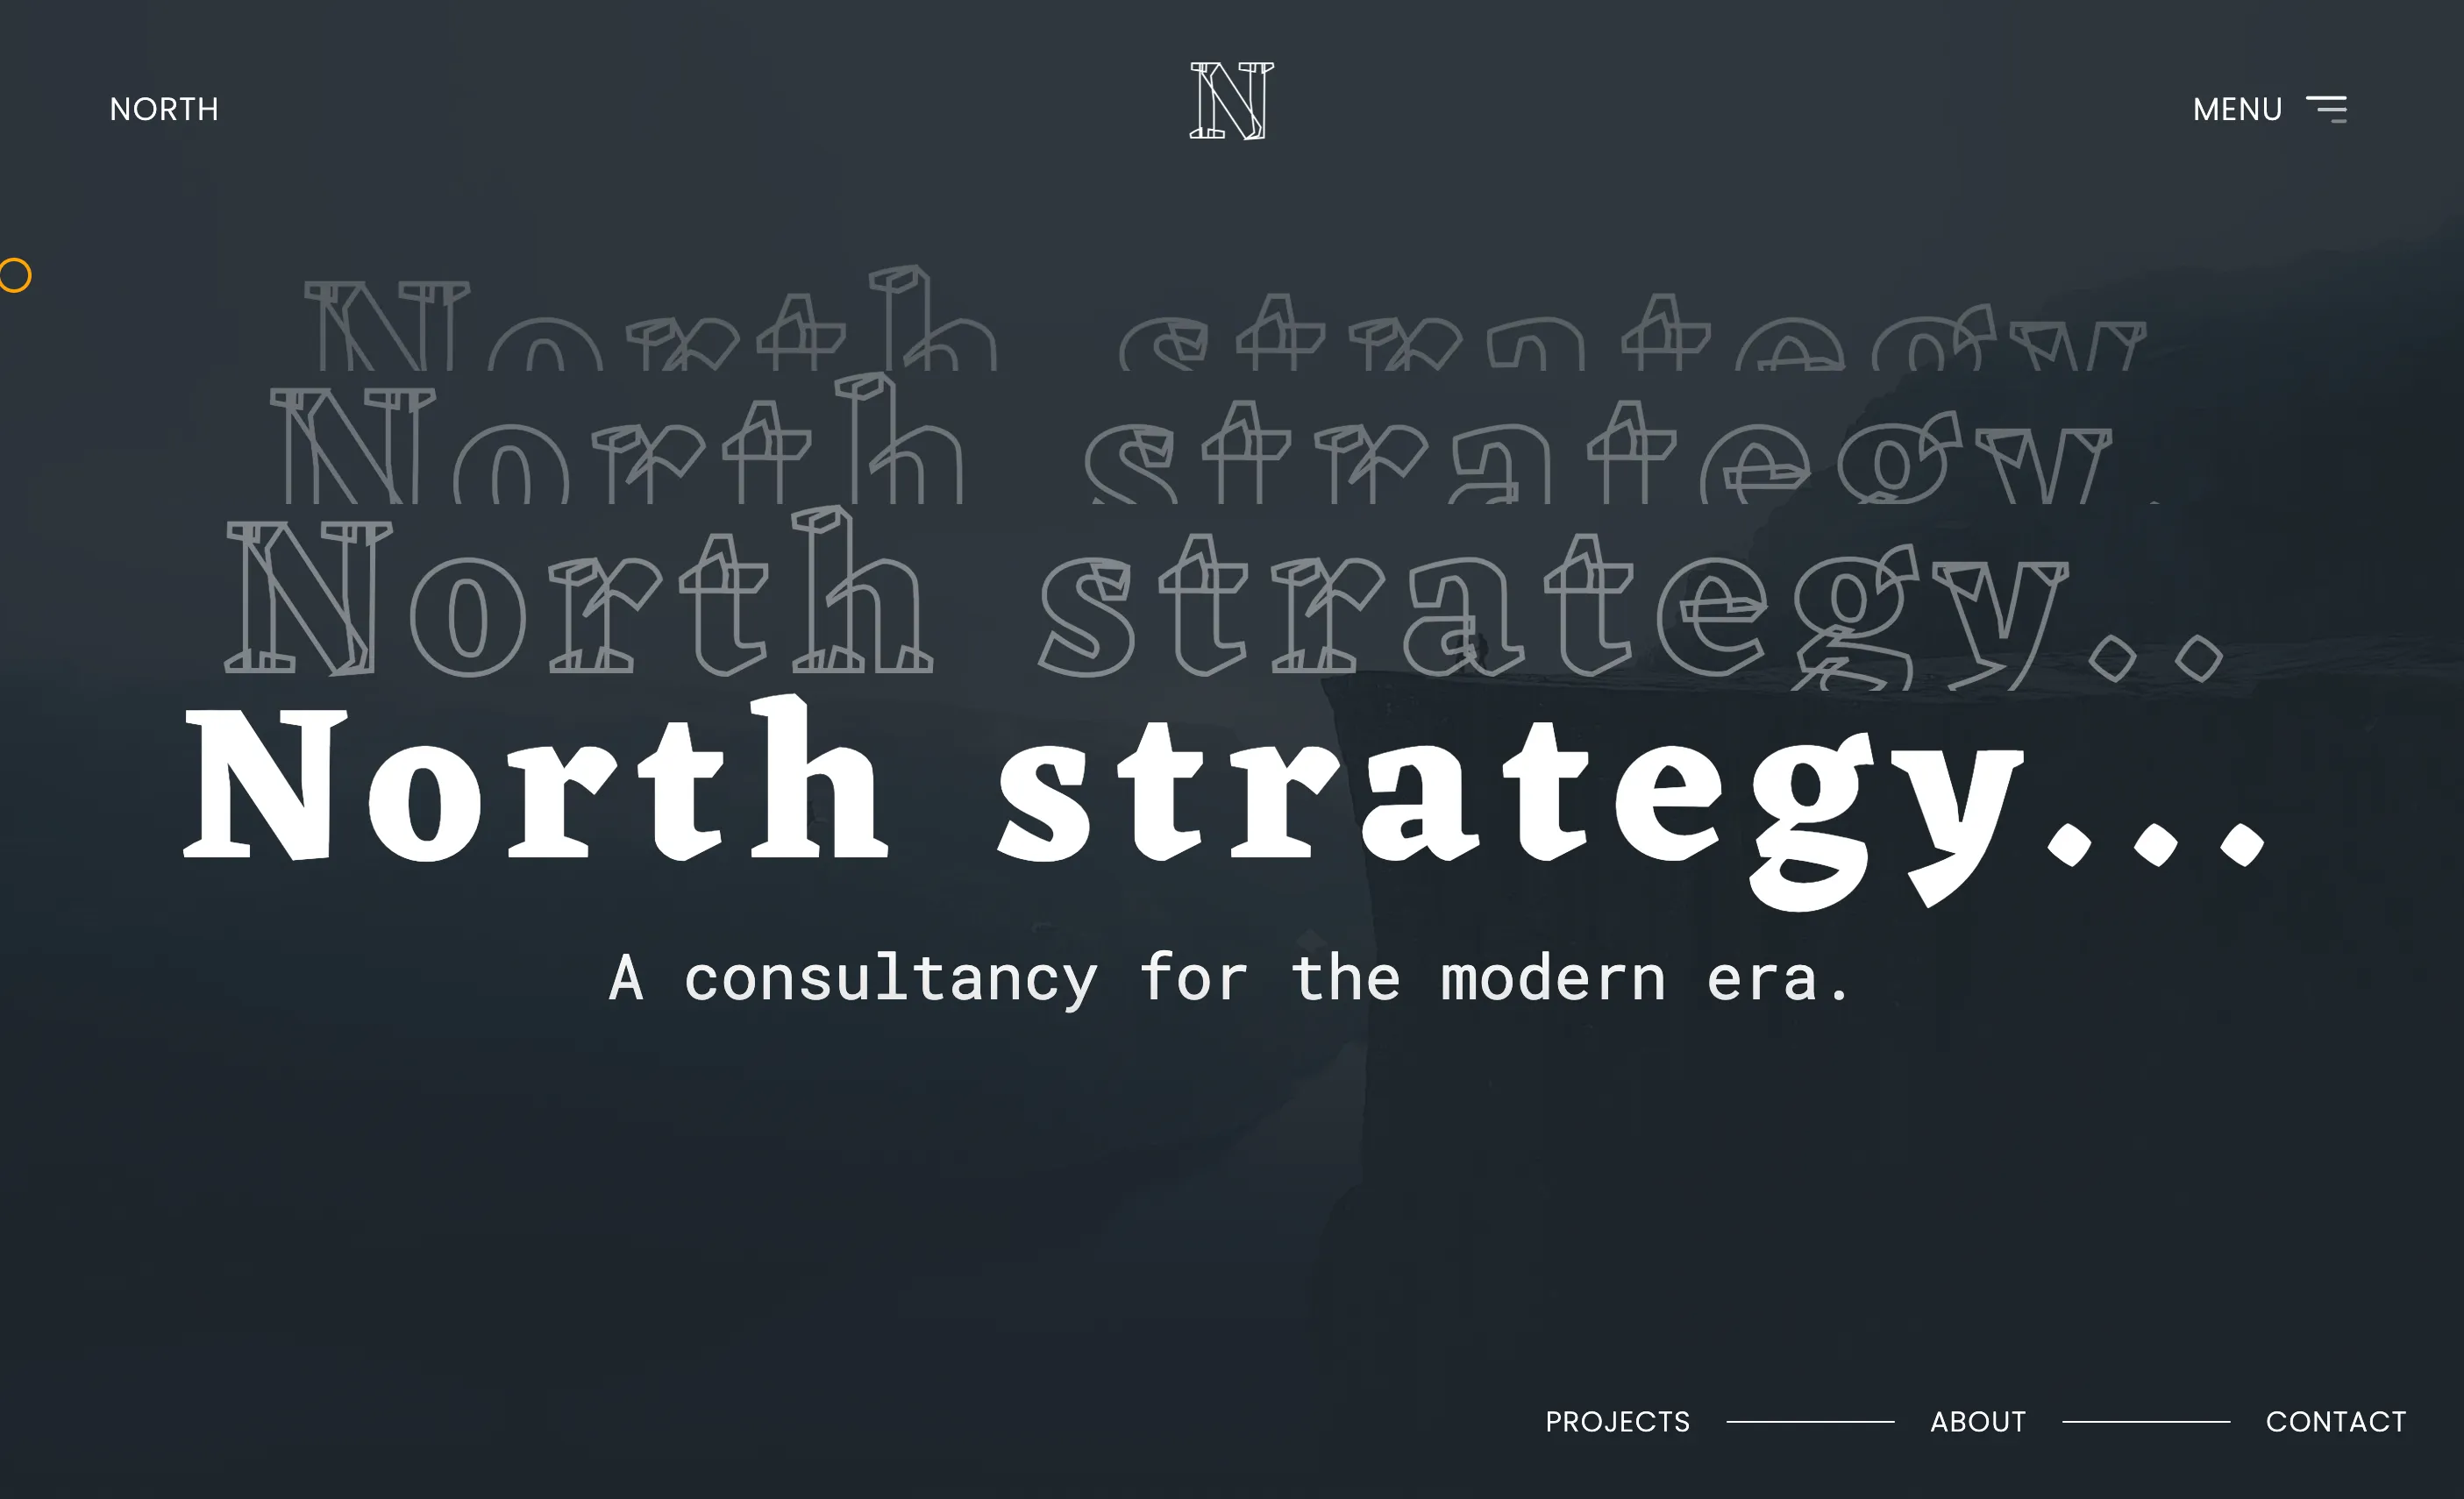 North Strategy project's image